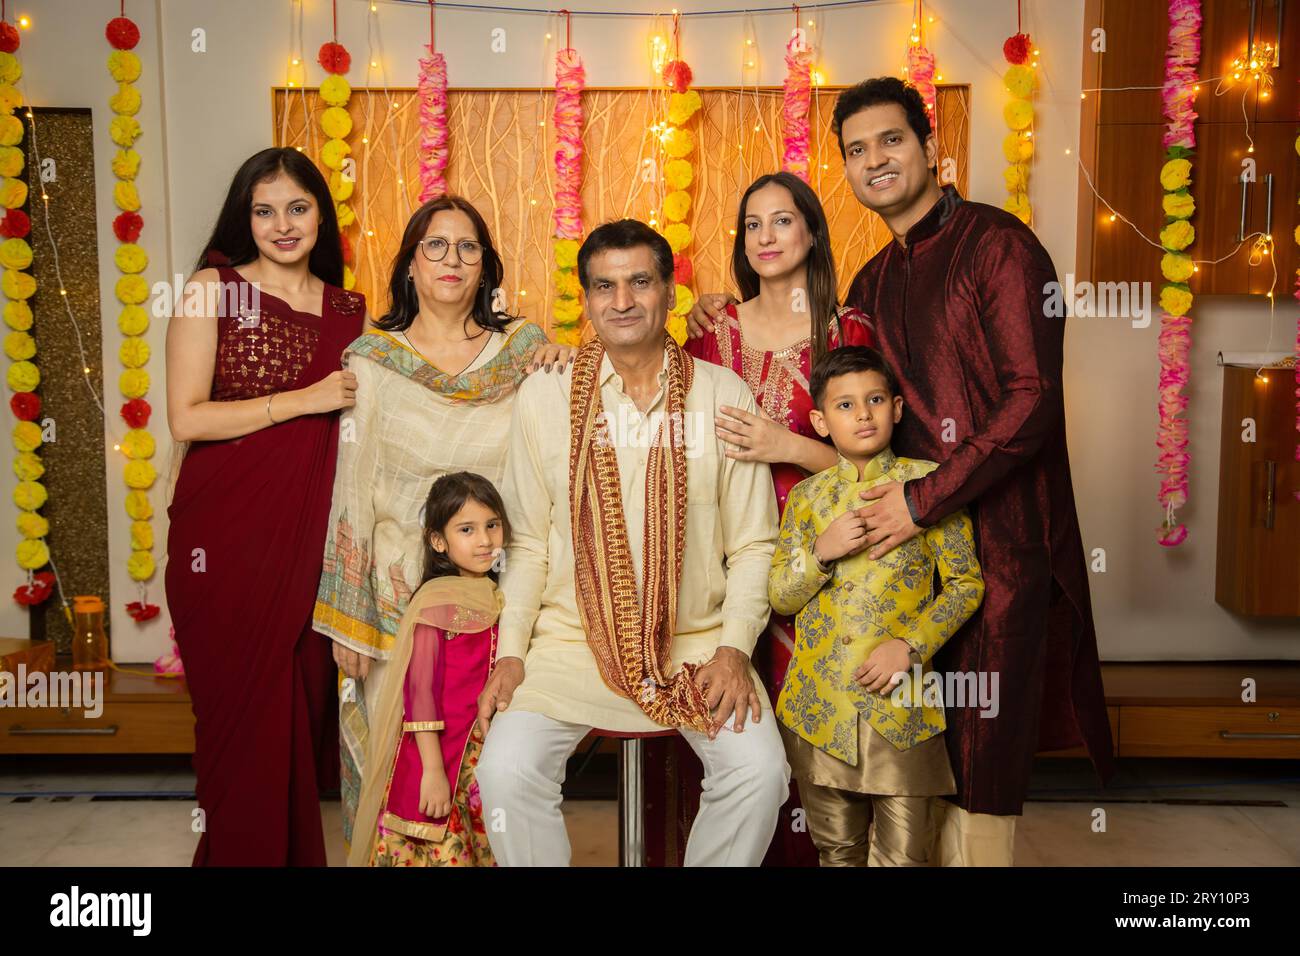 Portrait of happy Indian family in traditional dress celebrating diwali festival at home. Stock Photo